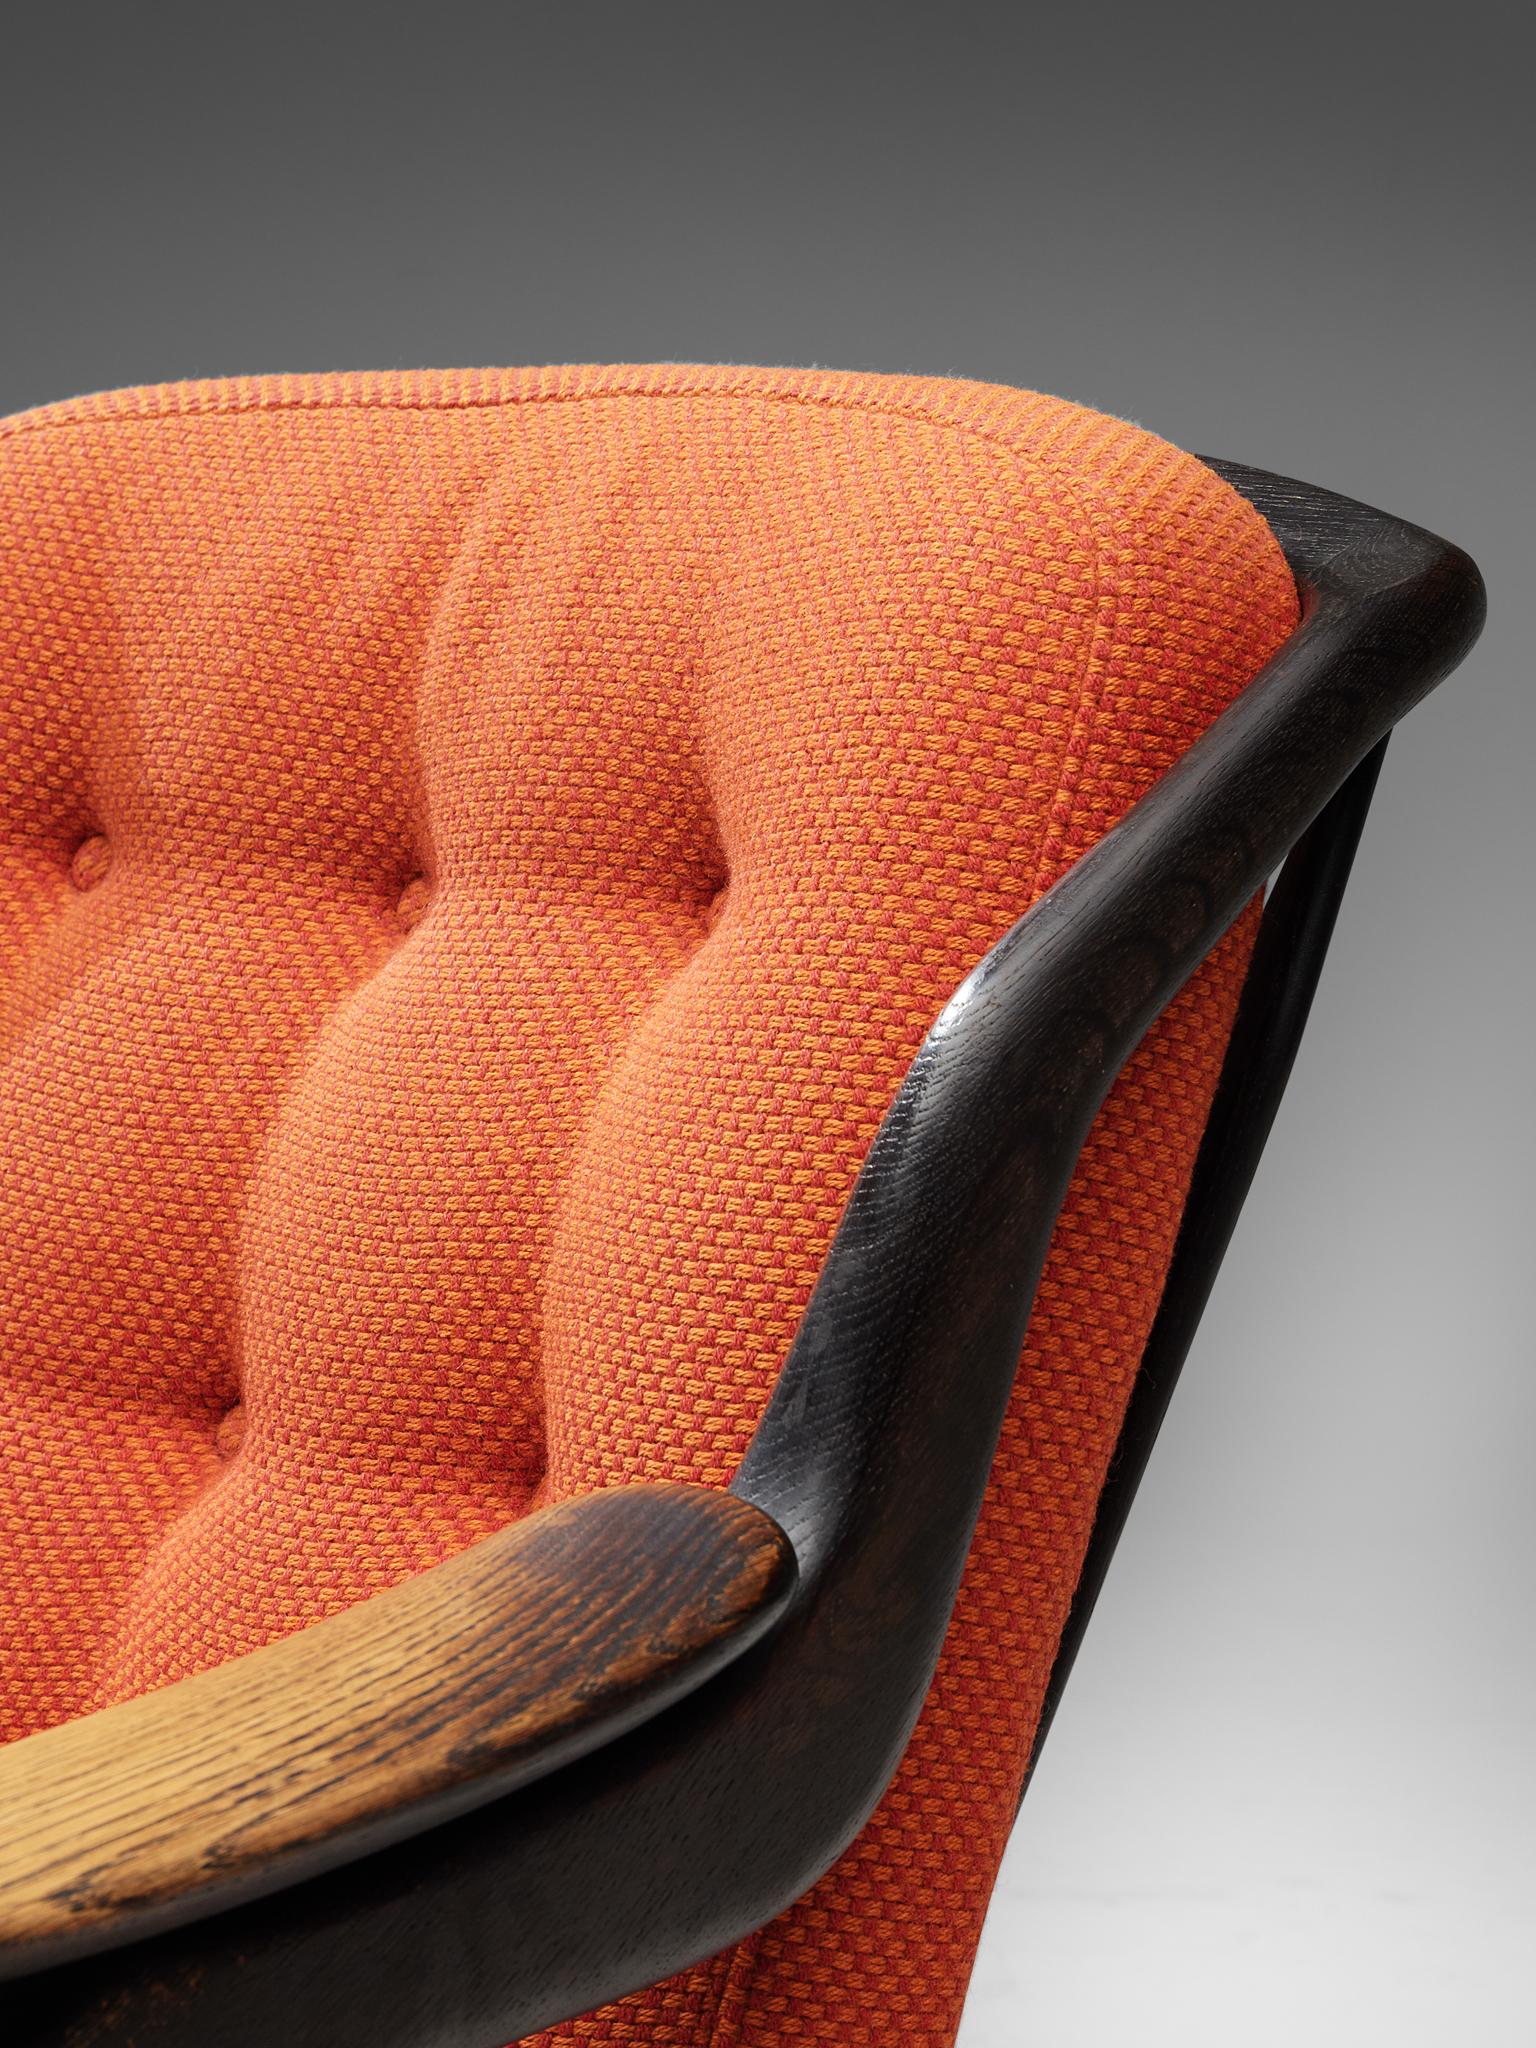 Mid-20th Century Pair of Lounge Chairs with Orange Upholstery by Guillerme & Chambron